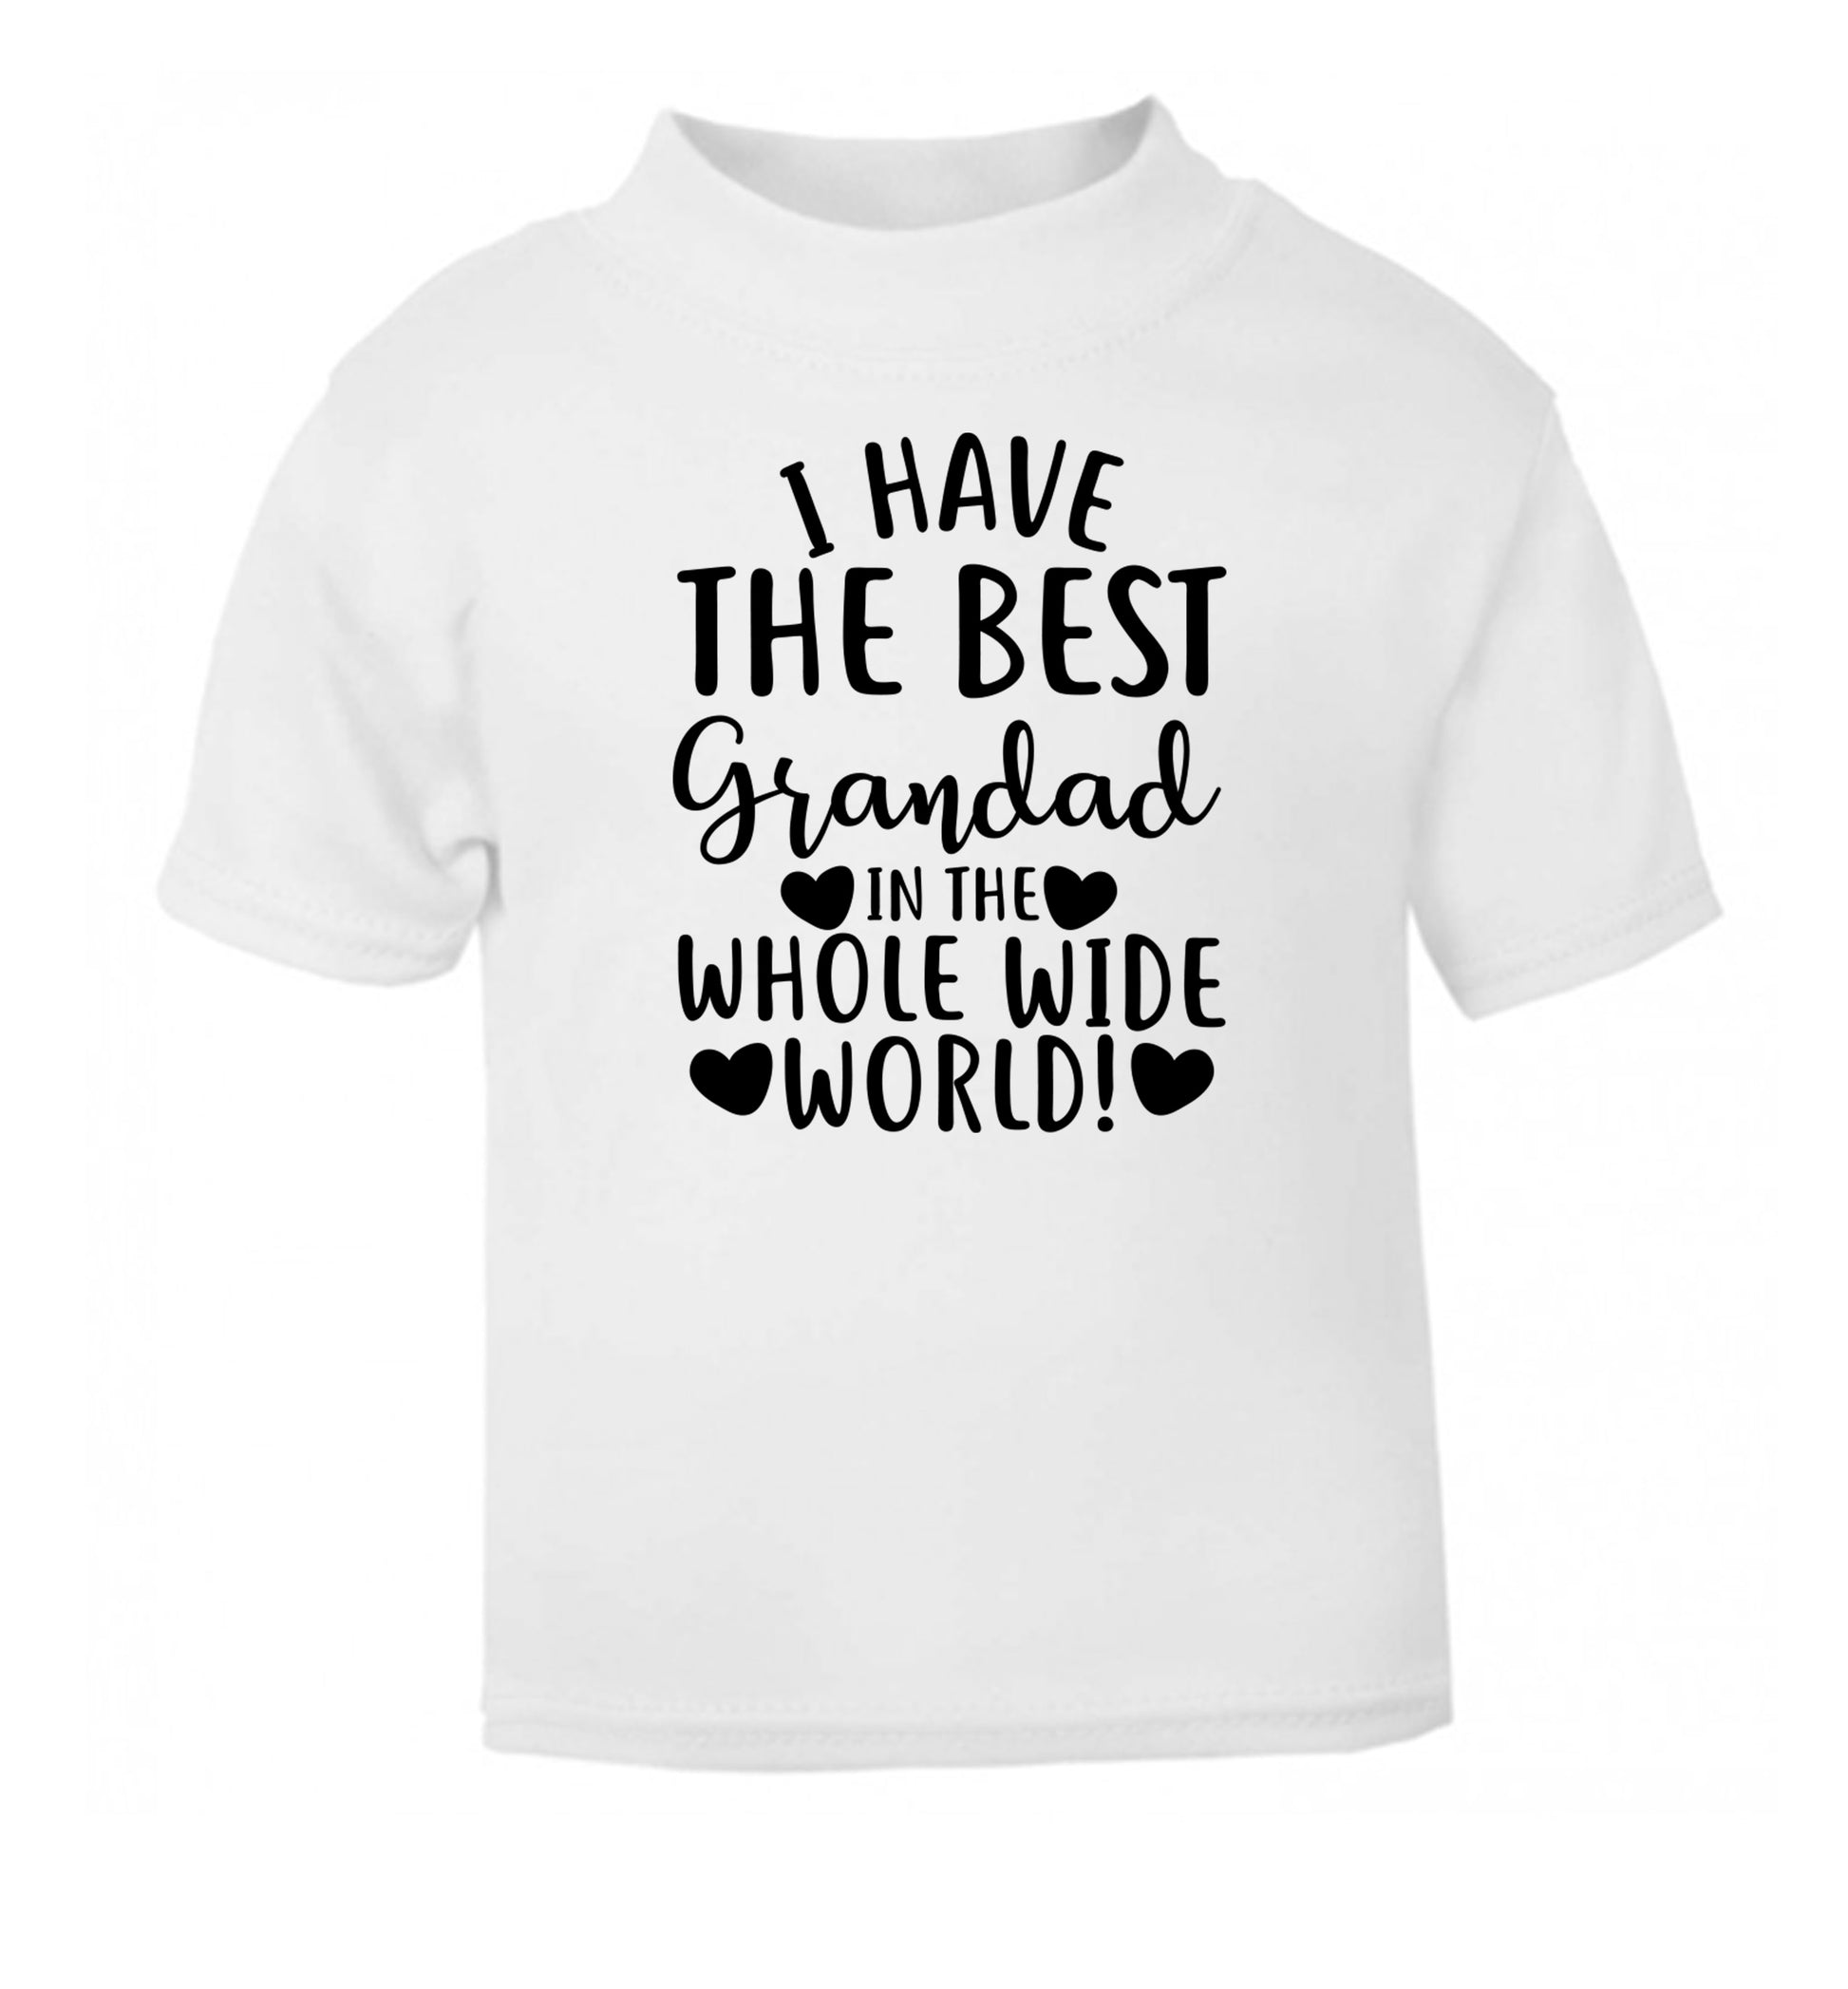 I have the best grandad in the whole wide world! white Baby Toddler Tshirt 2 Years